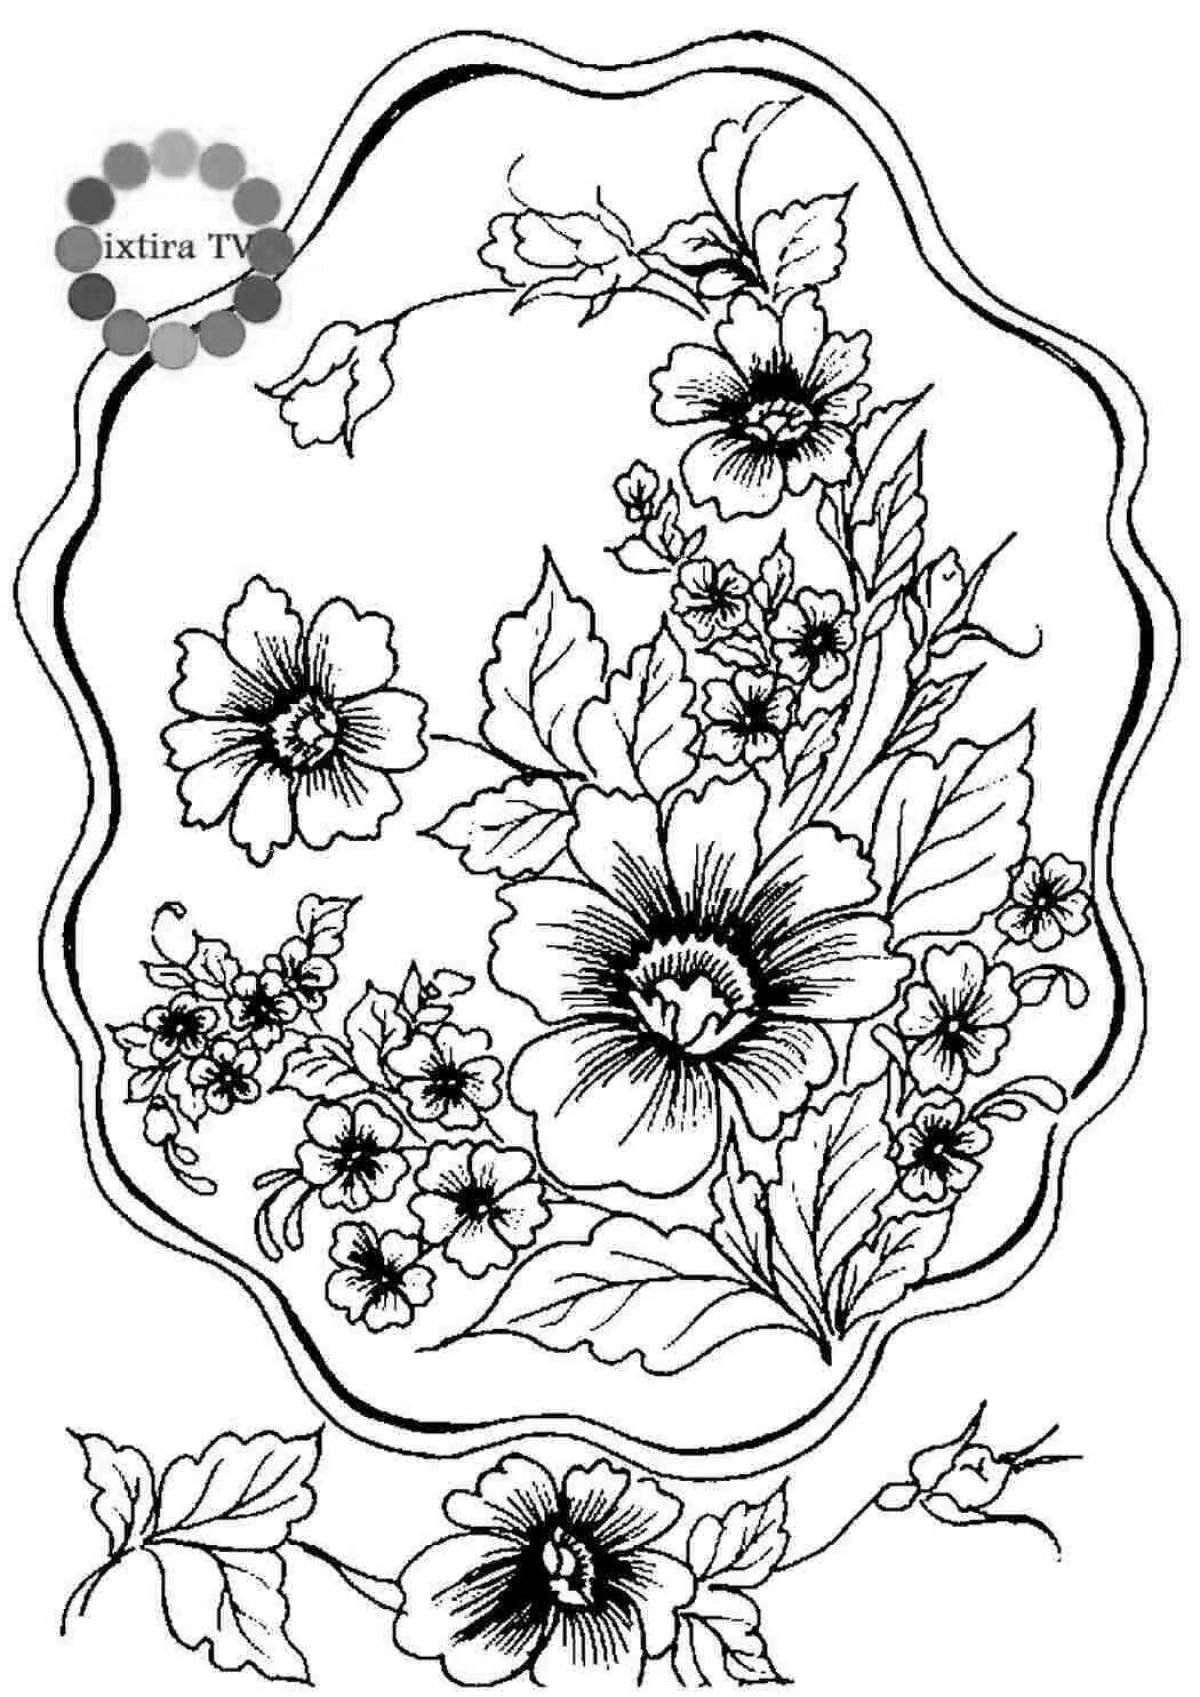 Merry Zhostovo painting coloring book for kids